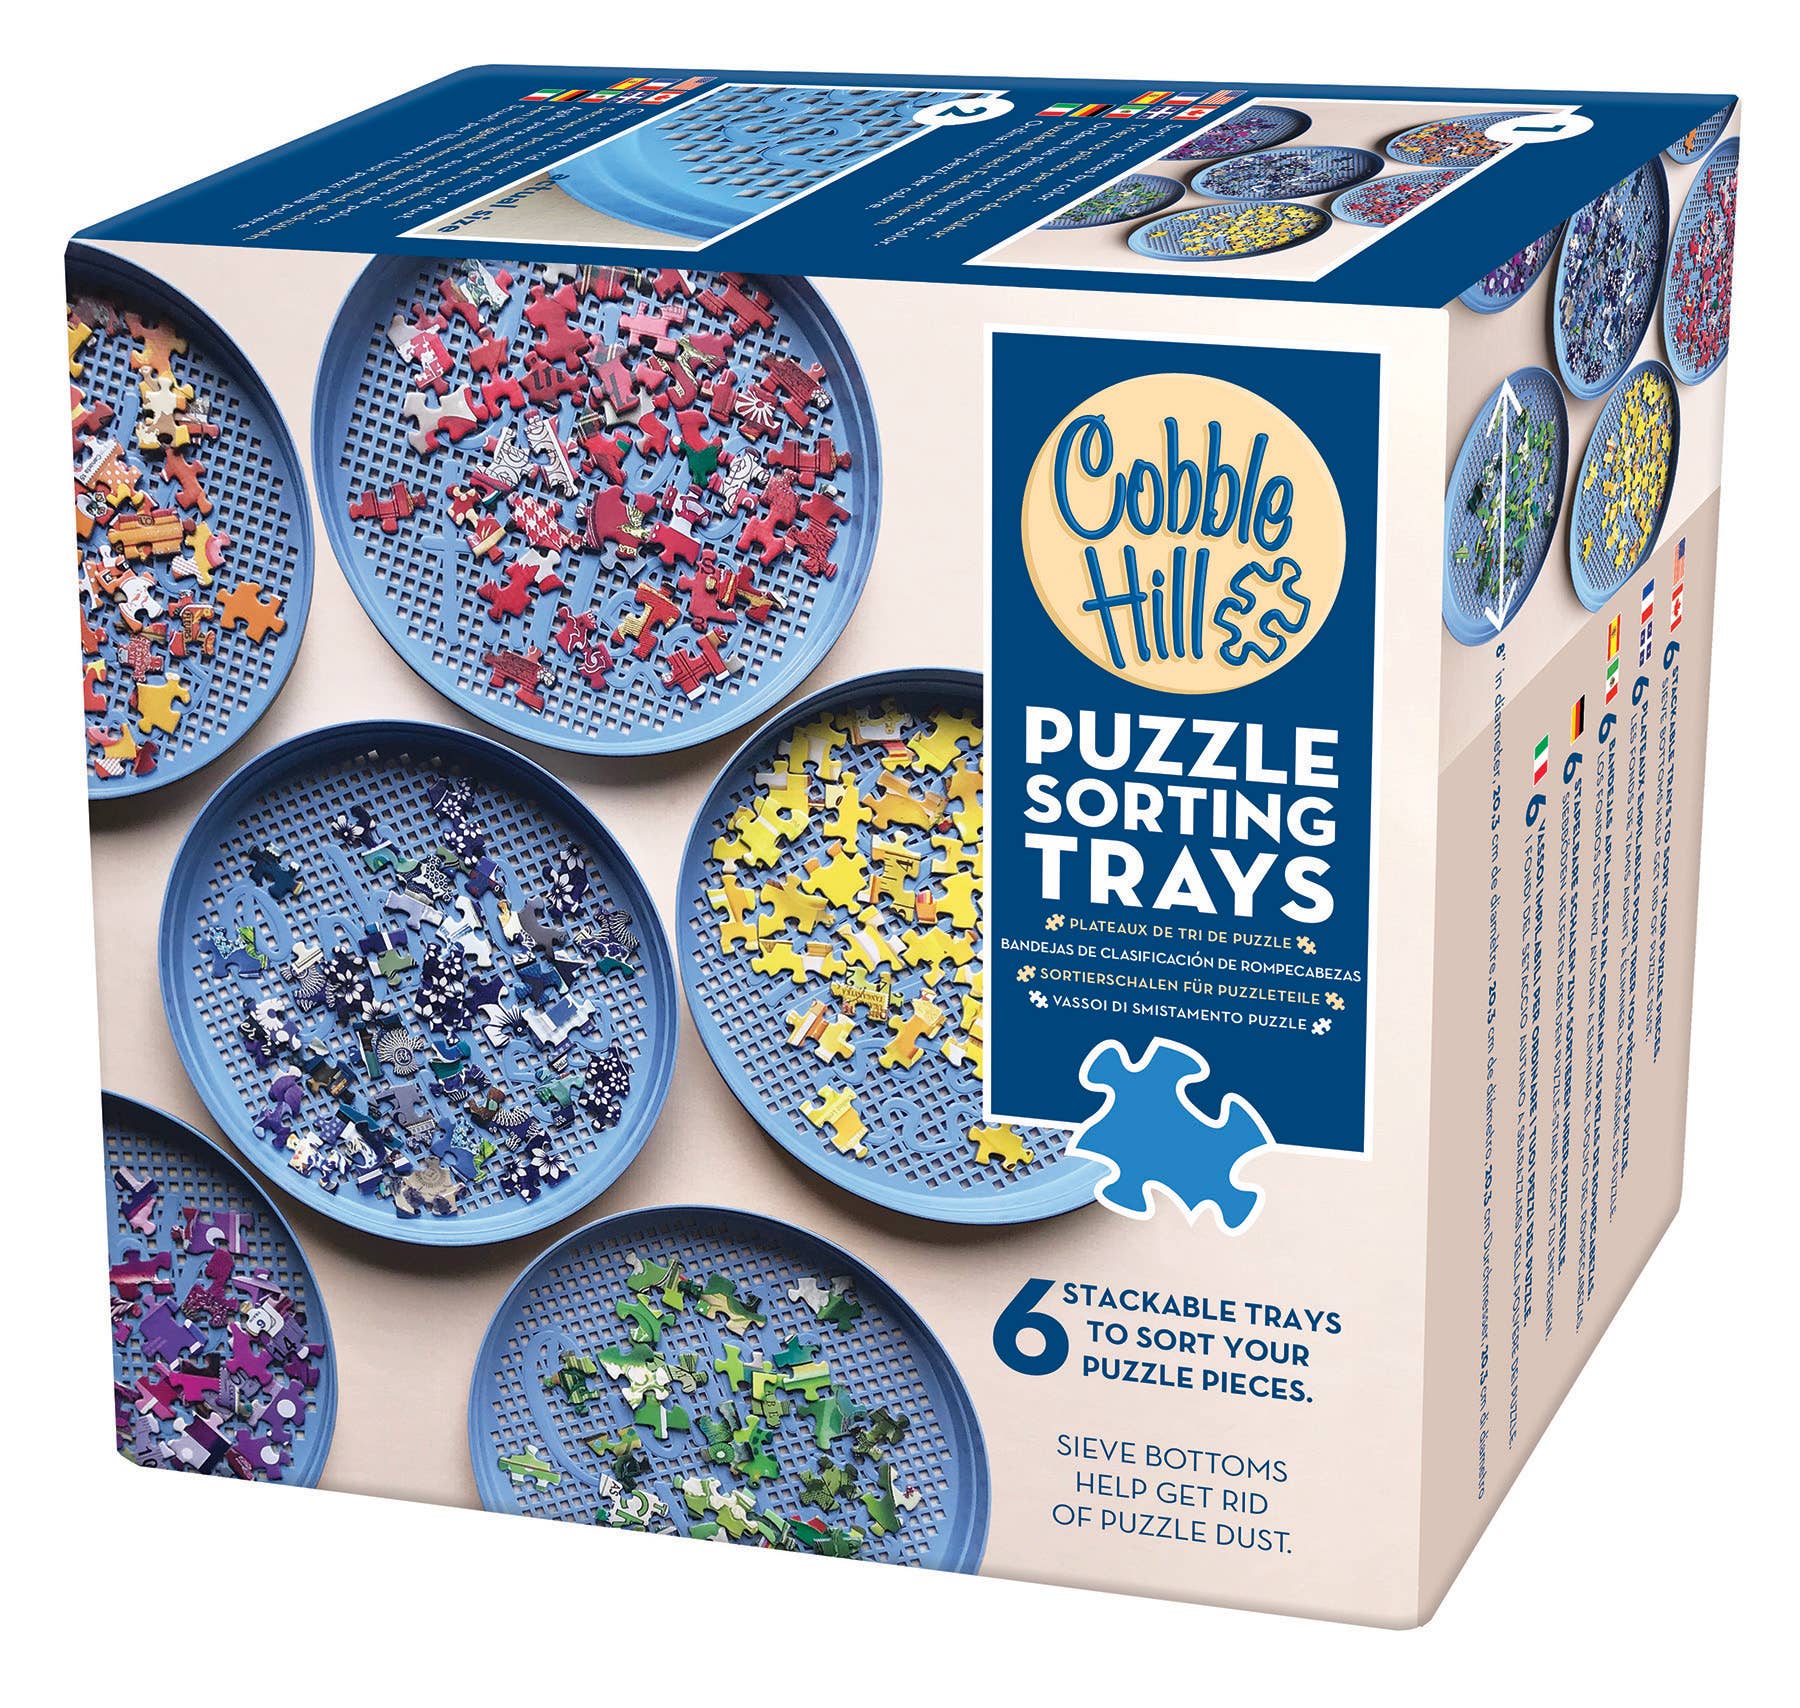 Trays: Puzzle Sorting Trays